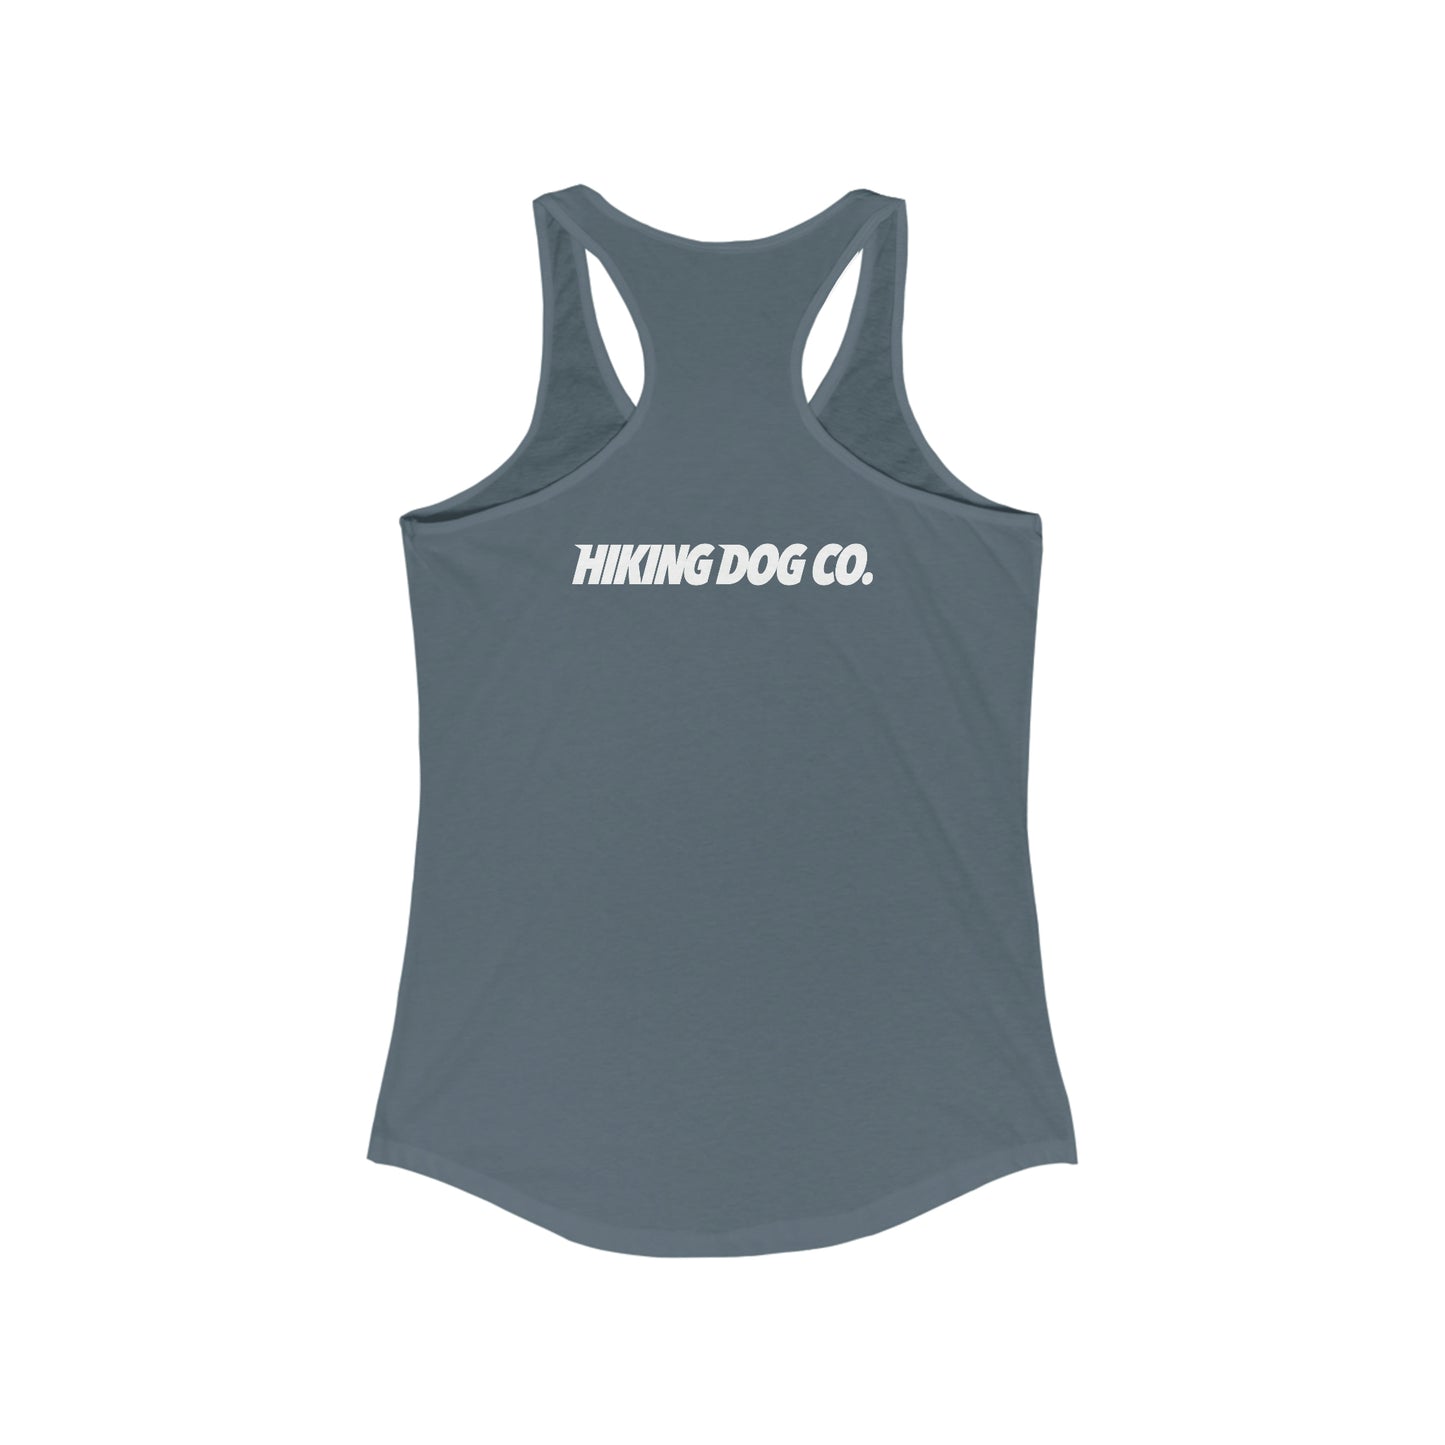 Mountain Trails and Dogs Women's Racerback Tank